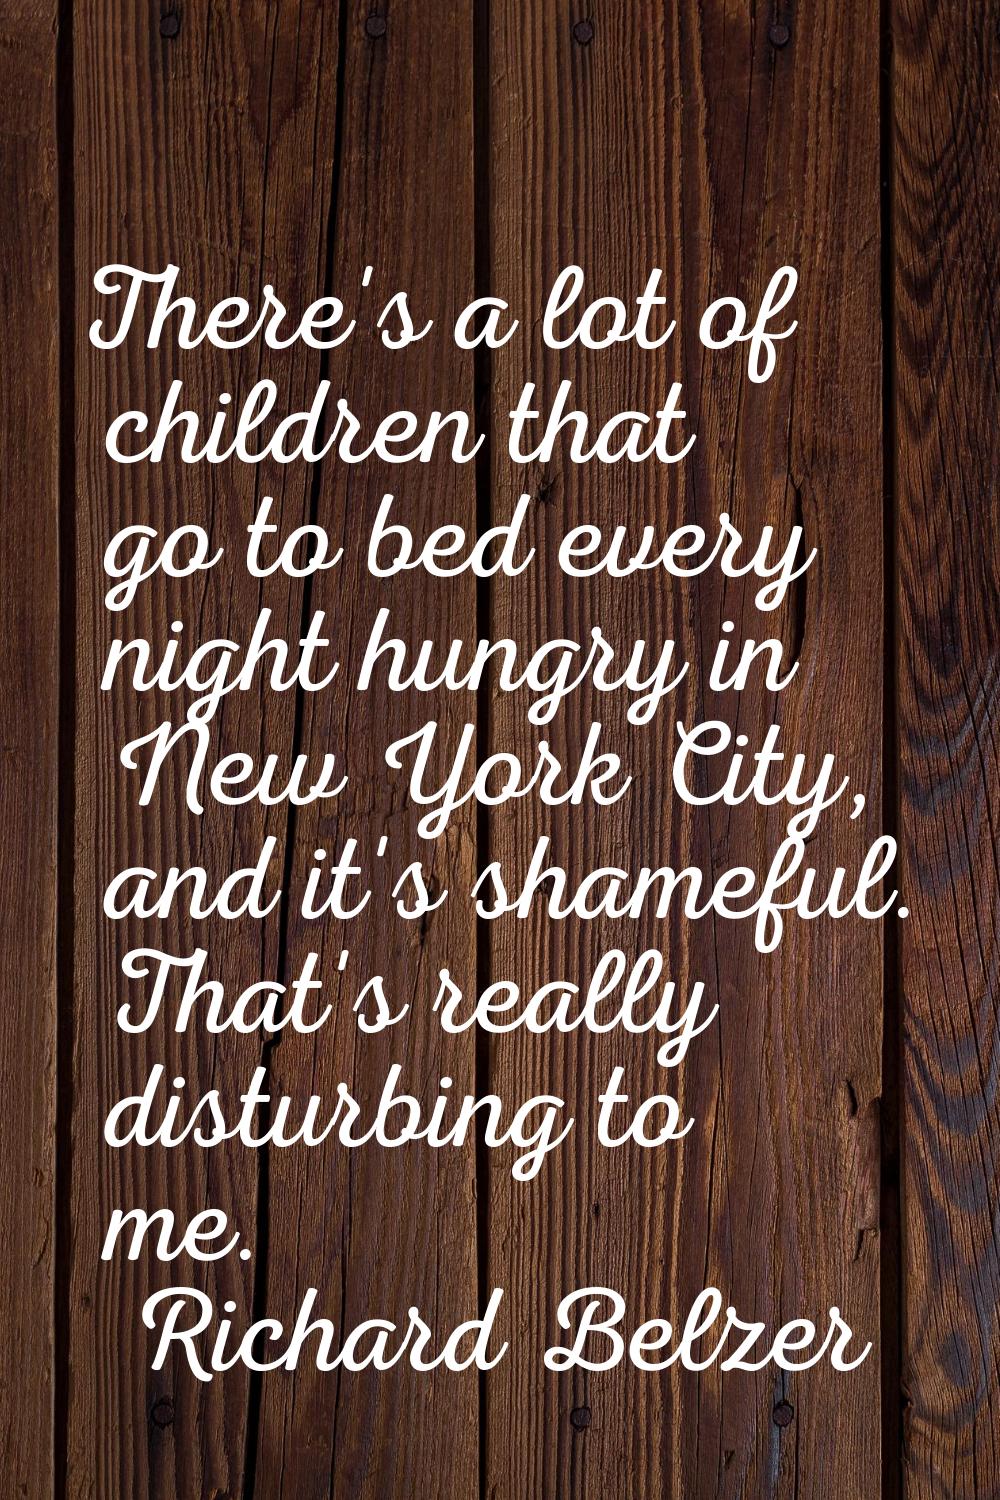 There's a lot of children that go to bed every night hungry in New York City, and it's shameful. Th